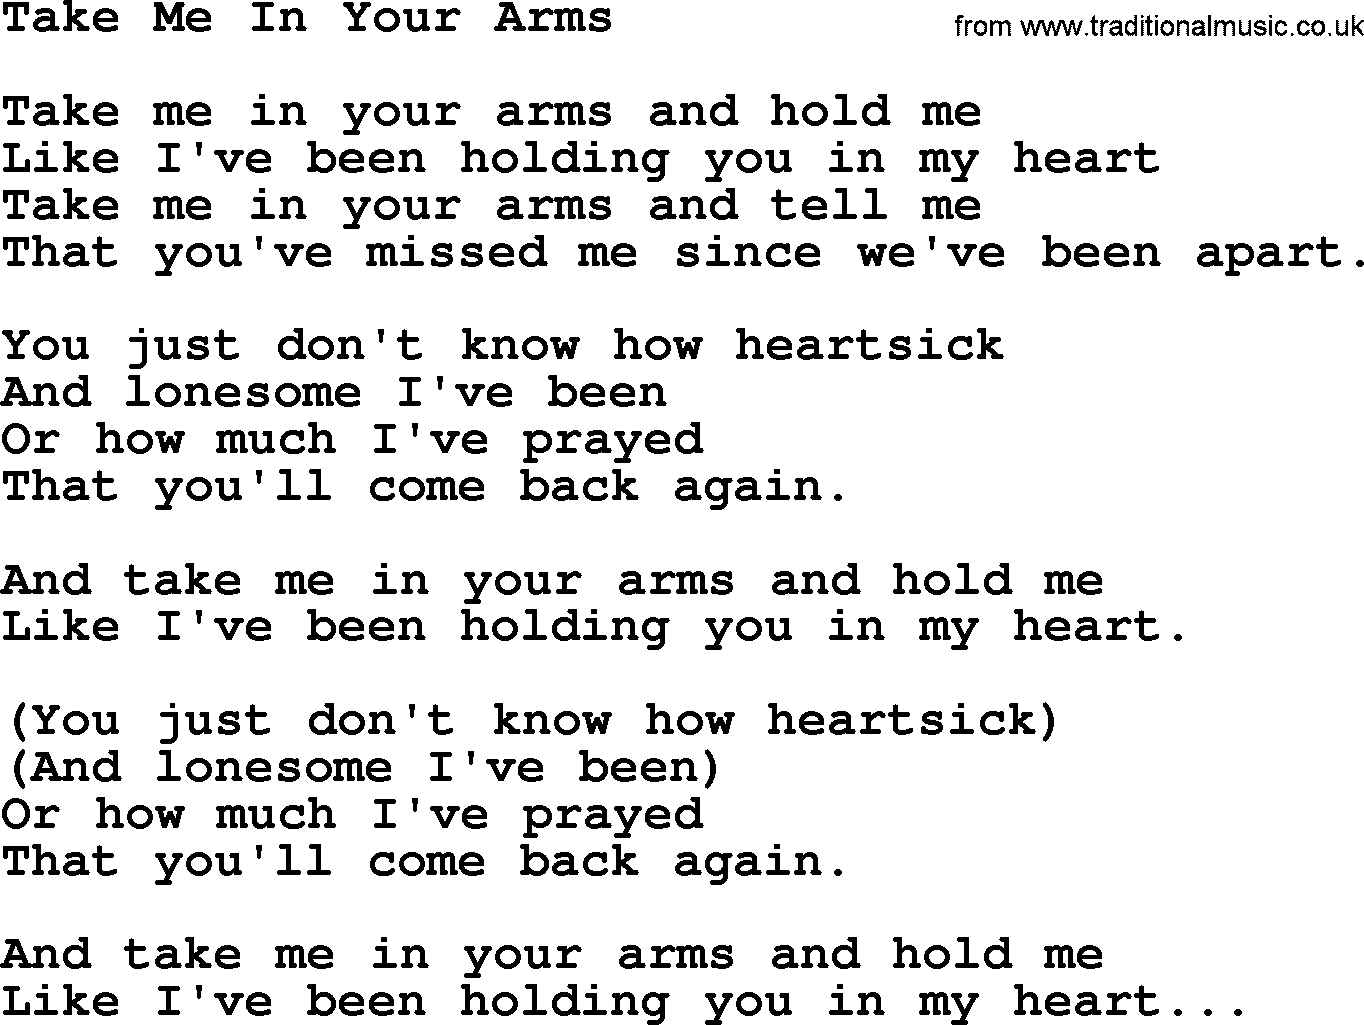 Willie Nelson song: Take Me In Your Arms lyrics